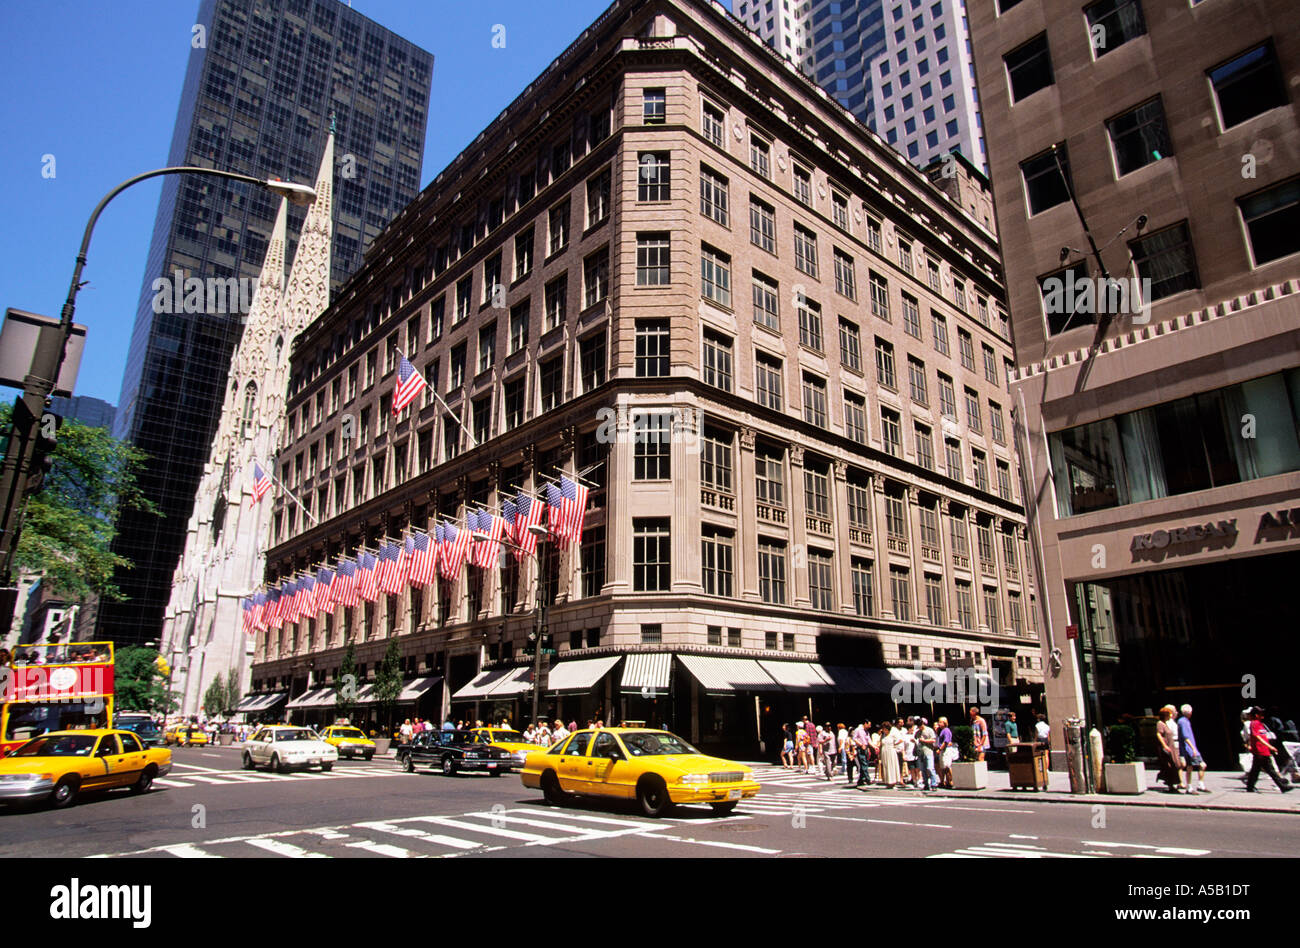 what is saks fifth avenue?